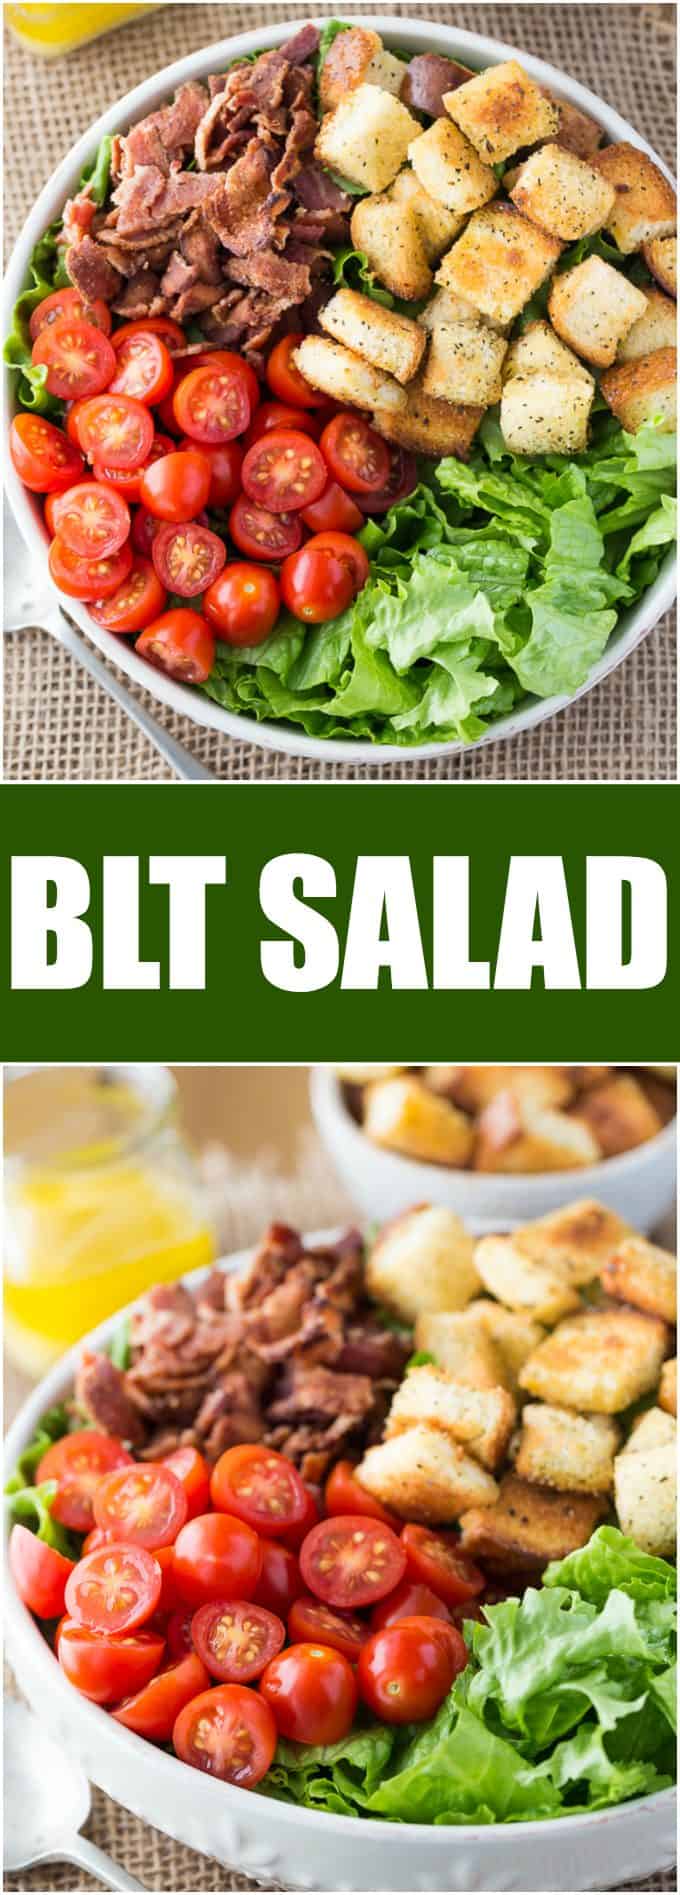 BLT Salad - Try your favourite sandwich as a salad! You'll love the fresh lettuce, juicy tomatoes and crisp bacon topped with savoury croutons and Honey Dijon Vinaigrette.